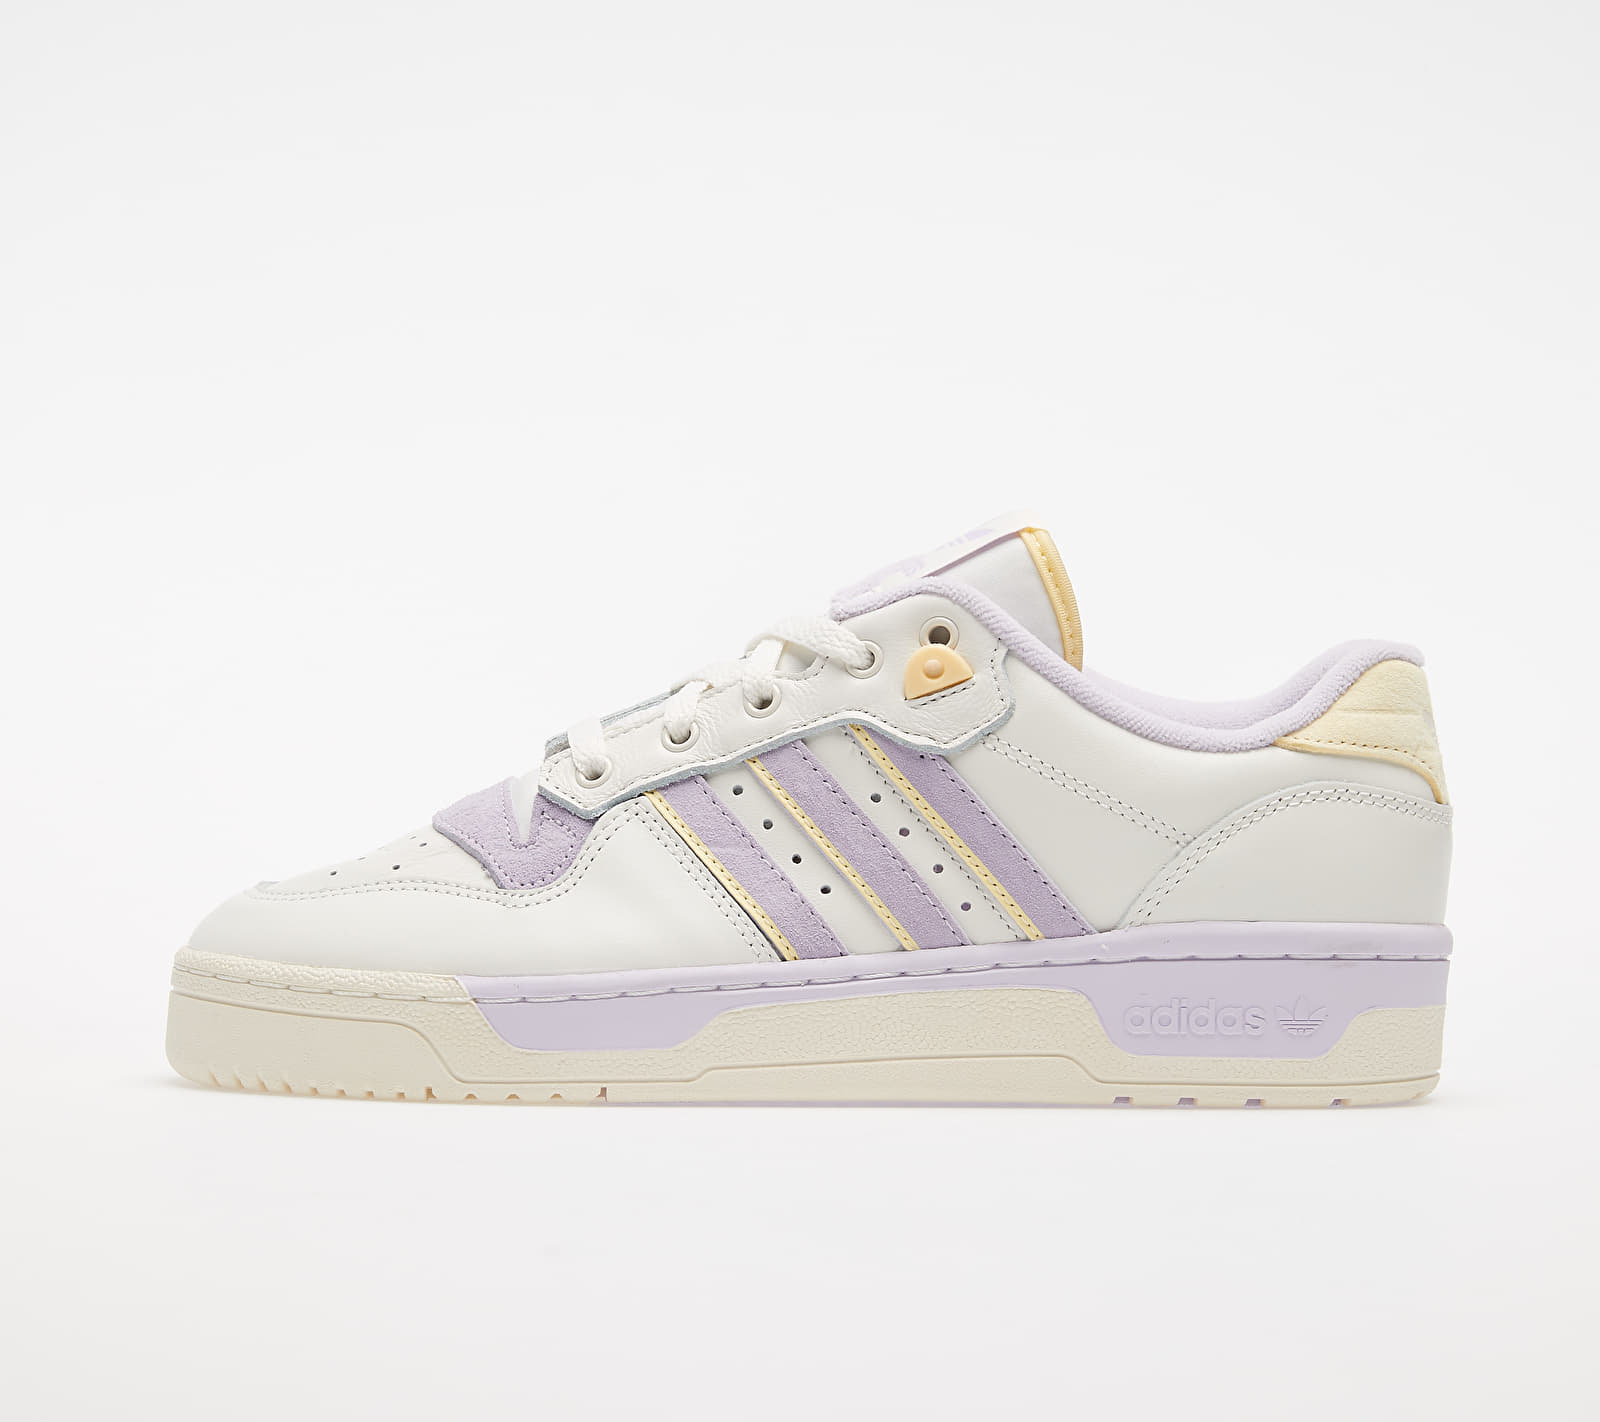 adidas Rivalry Low Cloud White/ Off White/ Purple Tint EF6413